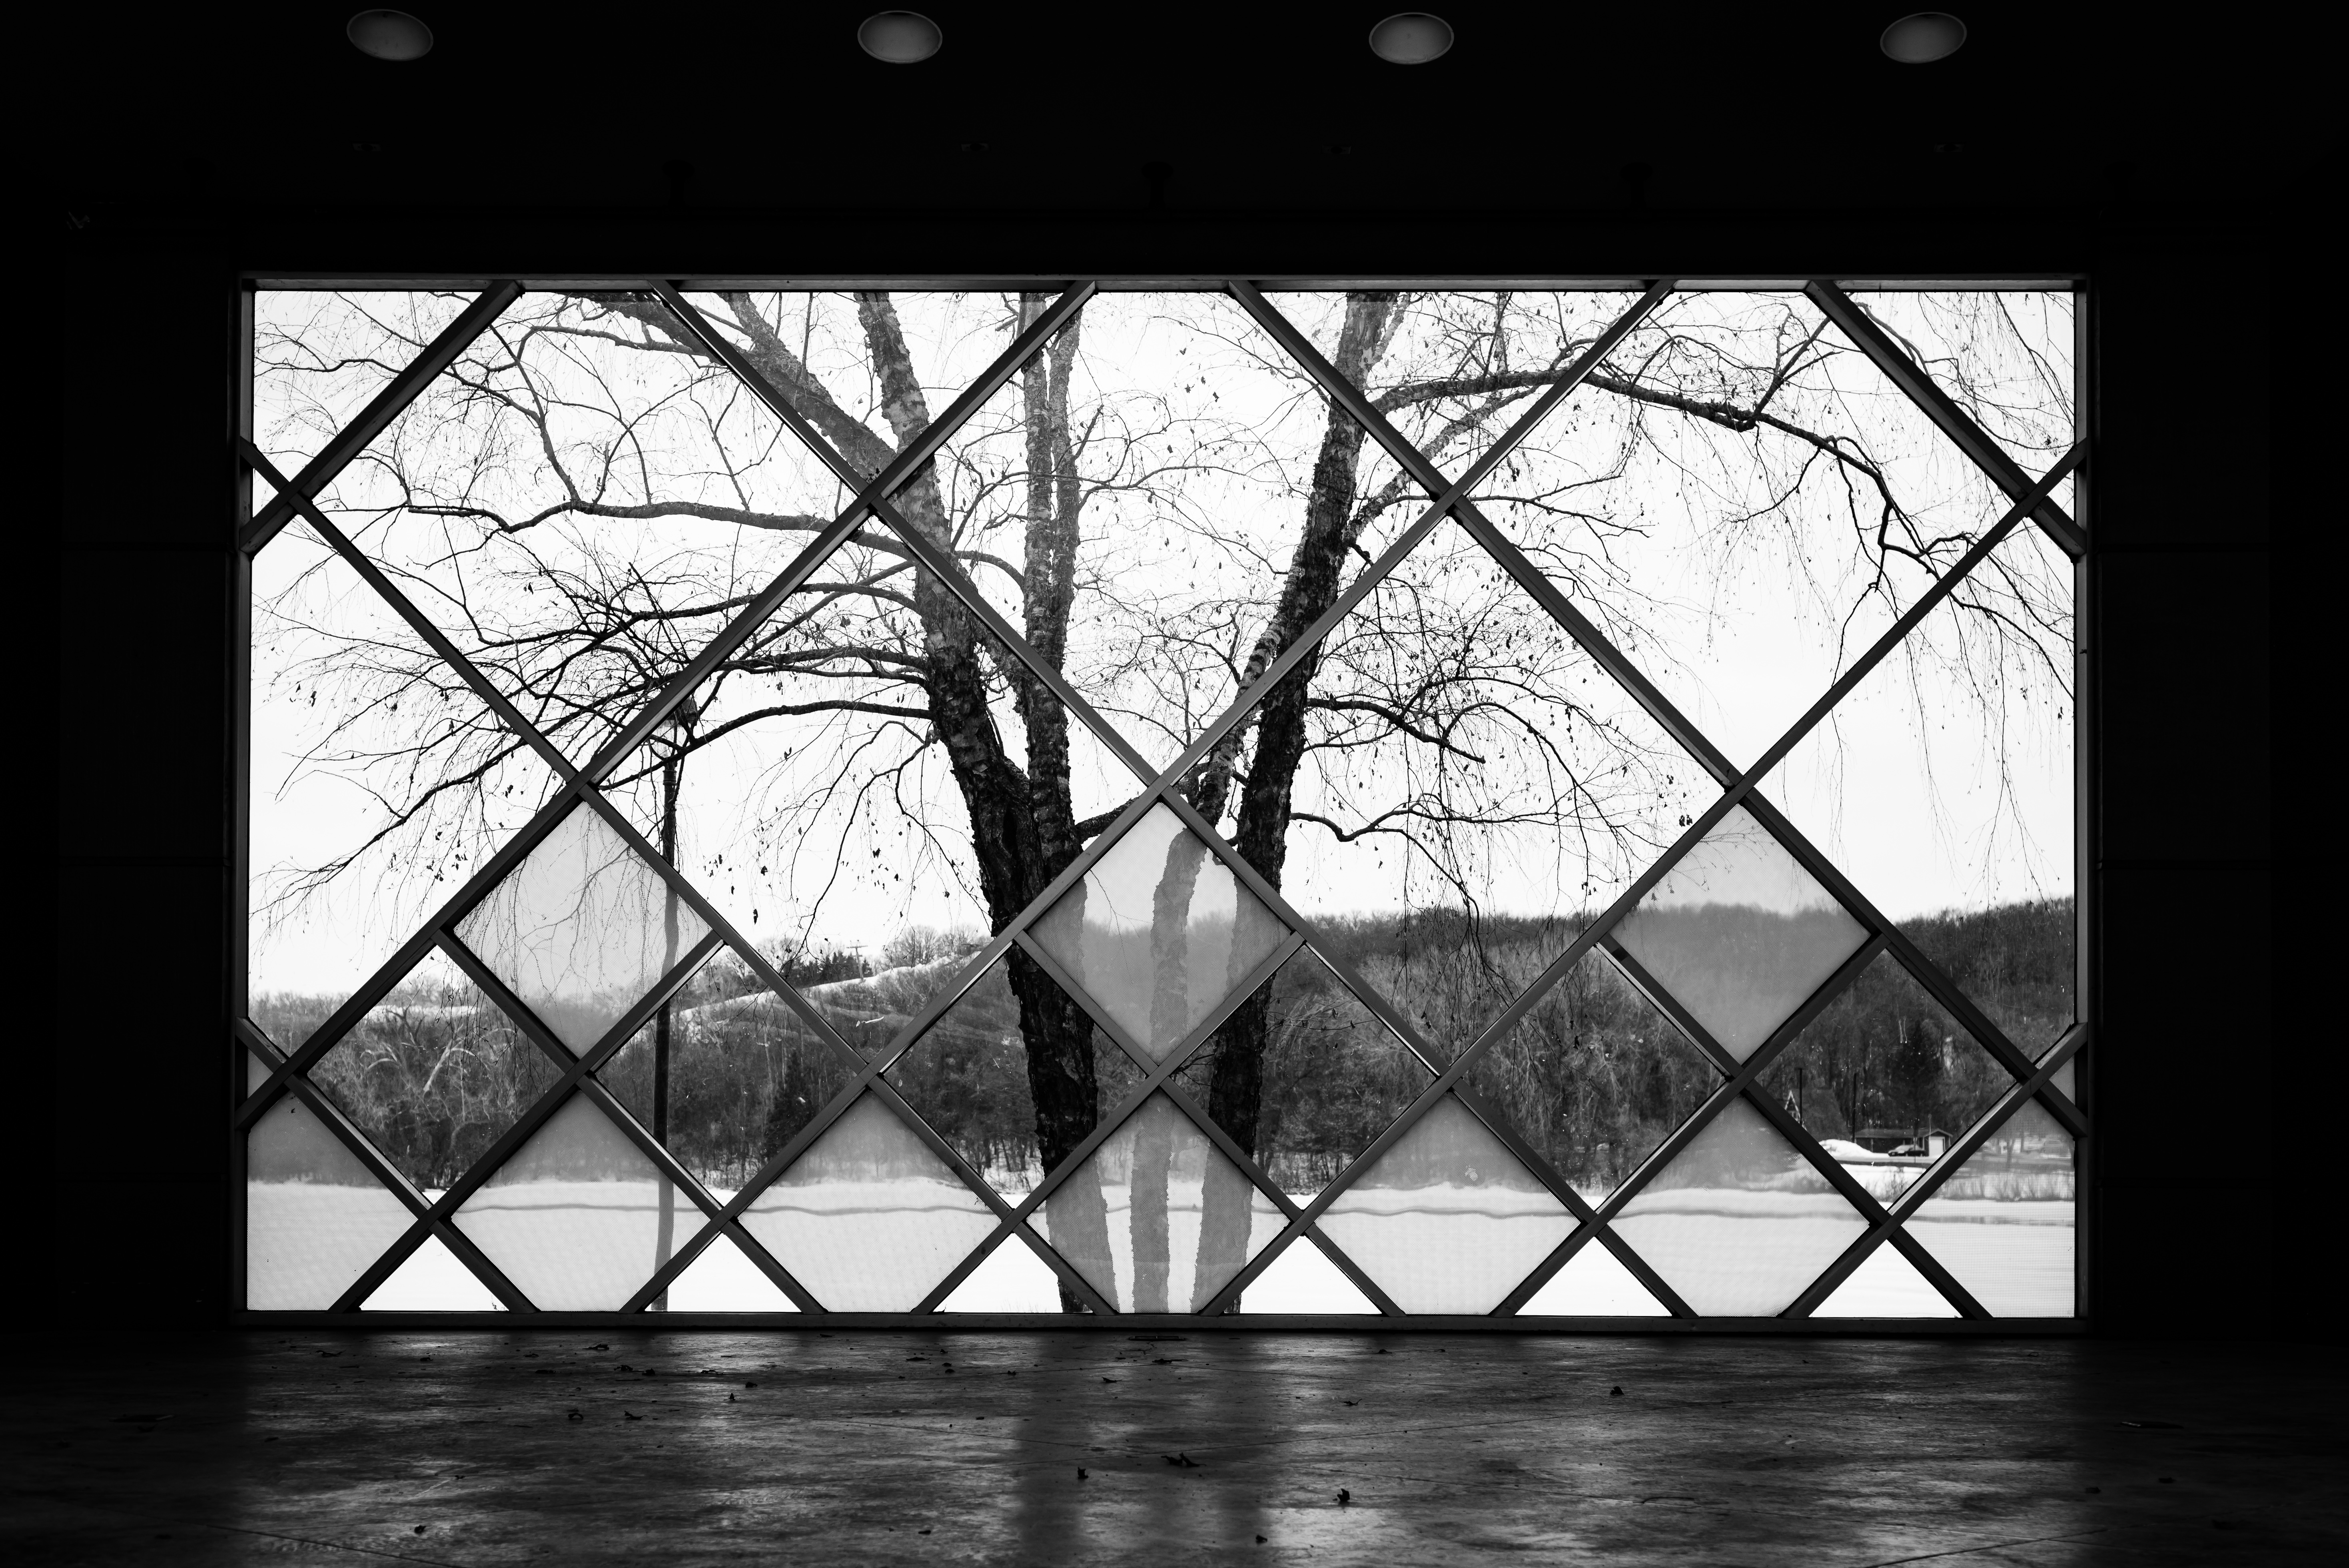 Framed by a Window, Black, Frame, Tree, Water, HQ Photo